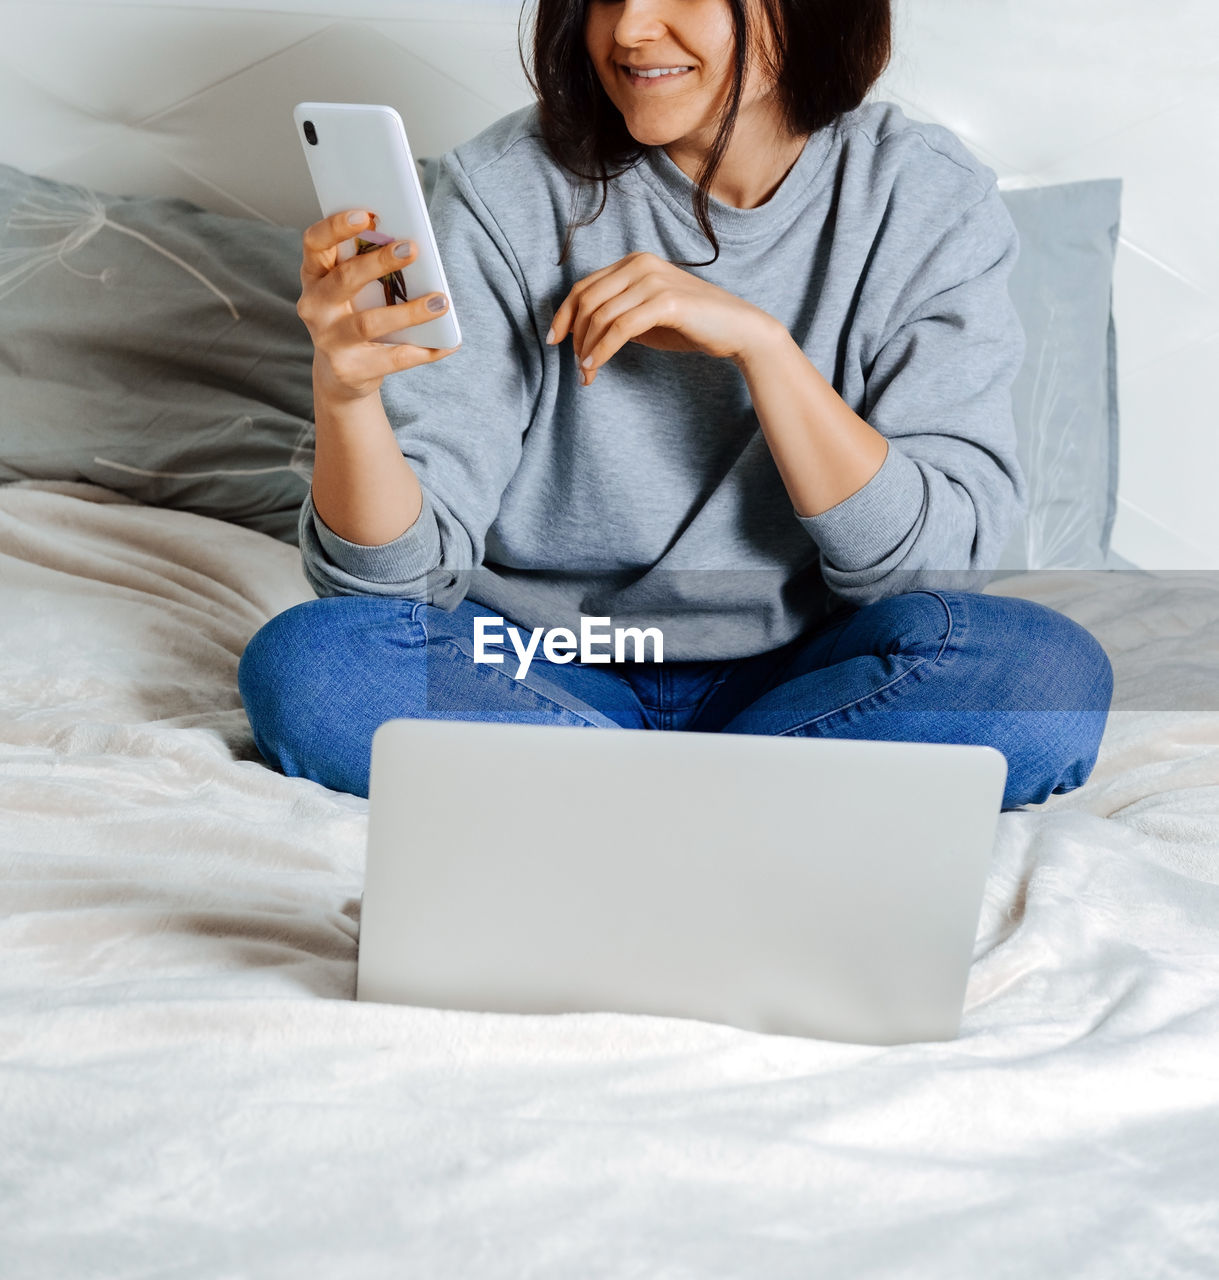 Midsection of woman using smart phone while sitting on bed